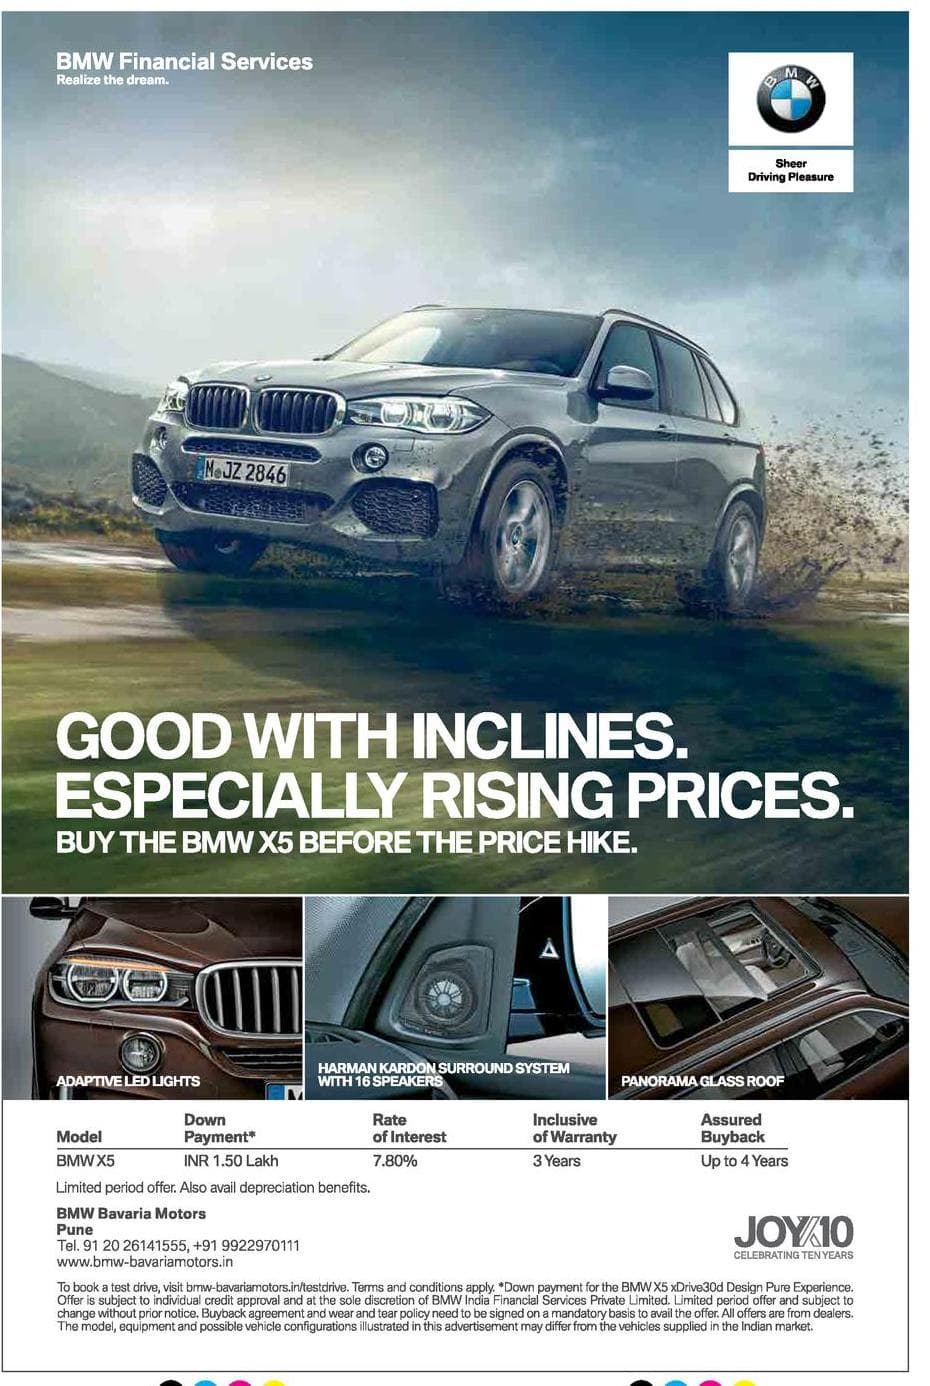 BMW Joyx10 Good With Inclines Especially Rising Price 